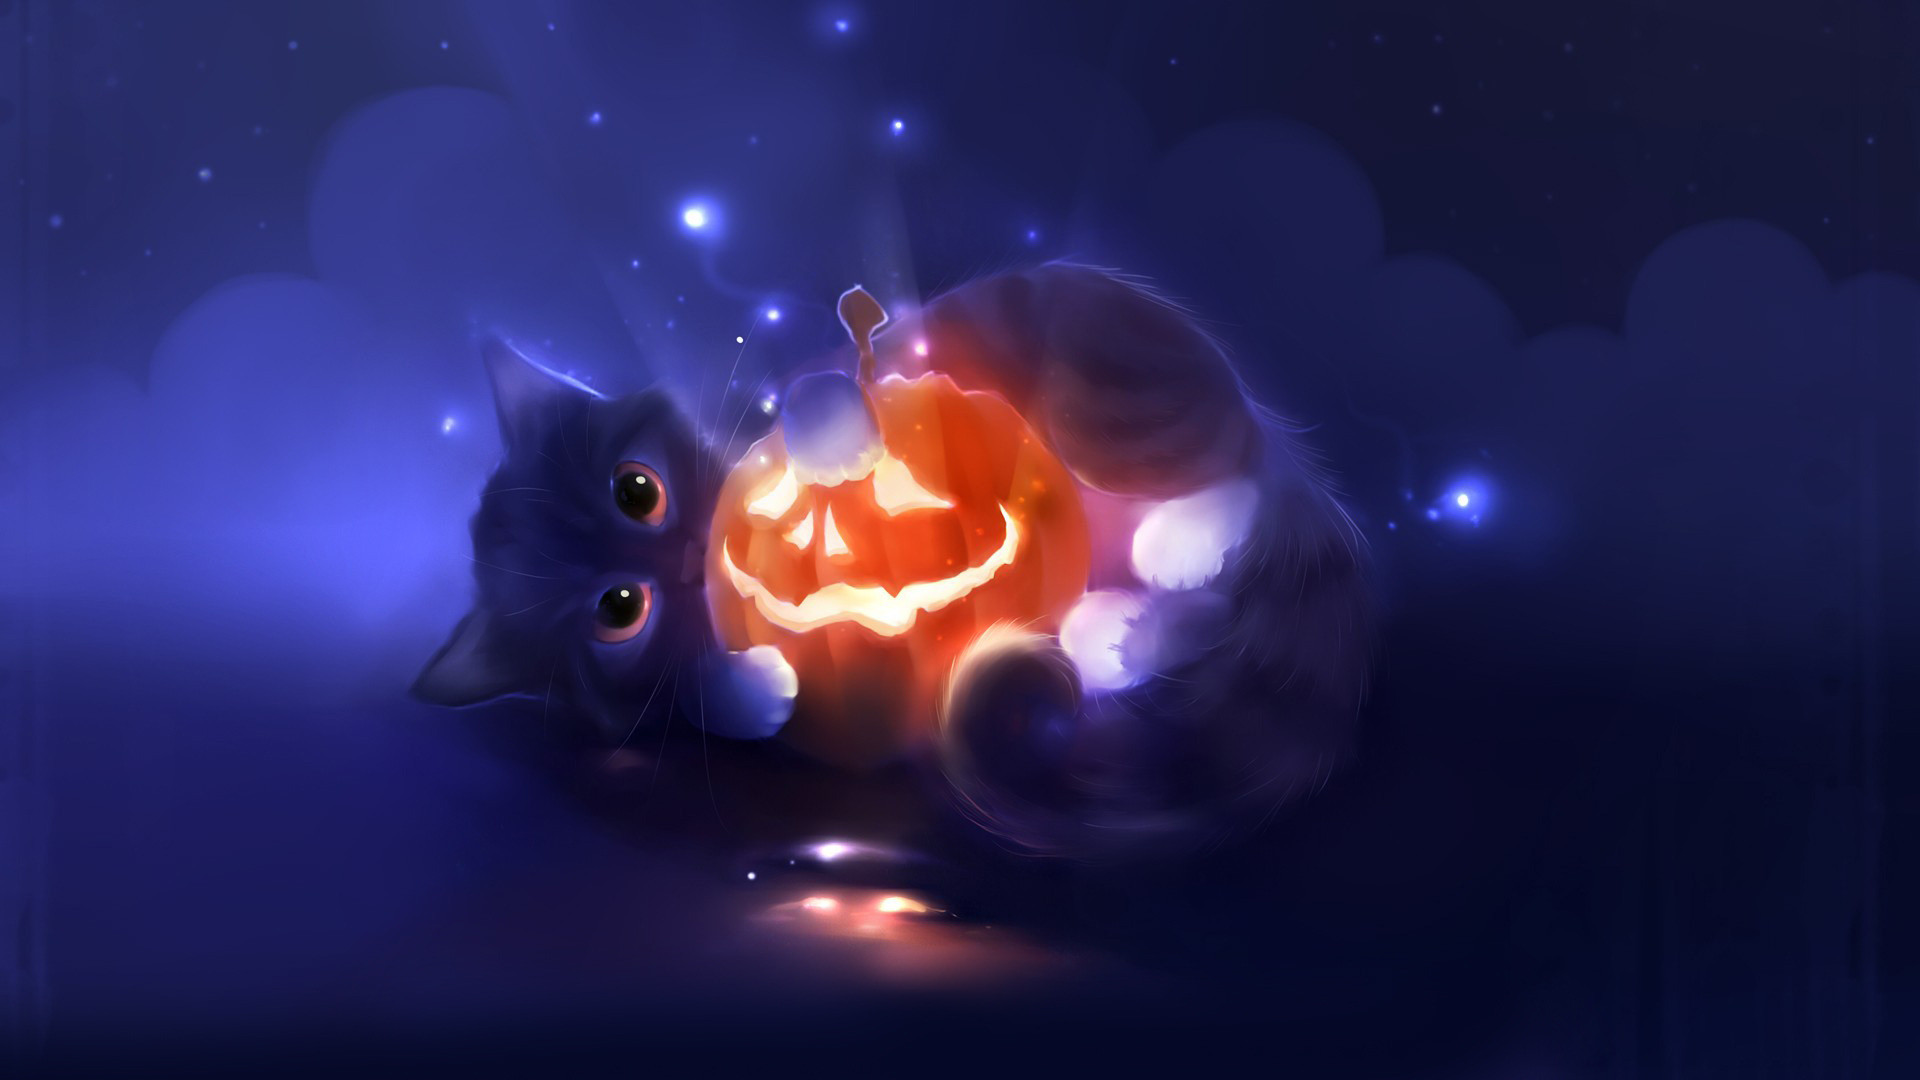 🔥 Free Download Cute Cat Halloween Wallpaper Images 1920x1080 For Your Desktop Mobile